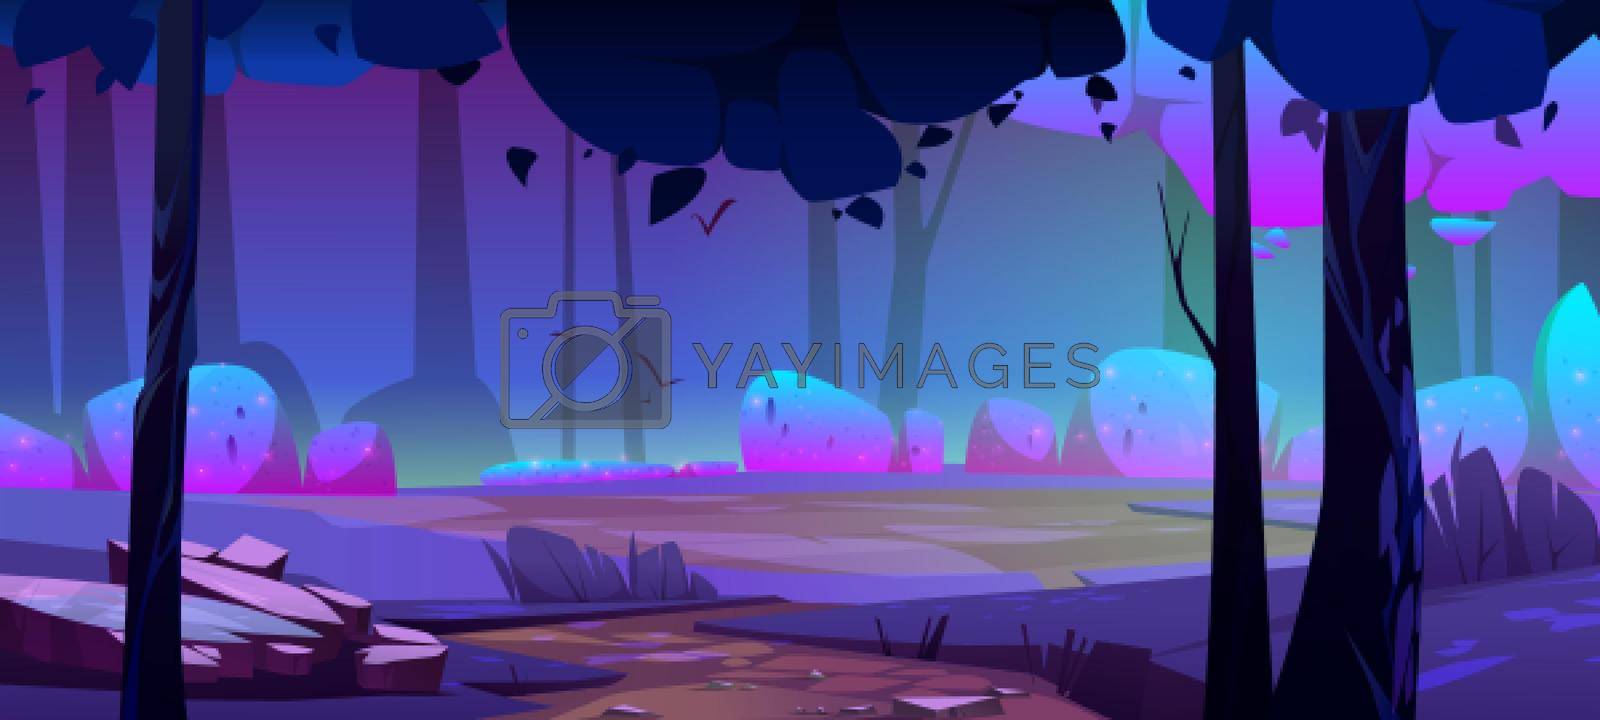 Royalty free image of Magic forest landscape with trees at night by vectorart